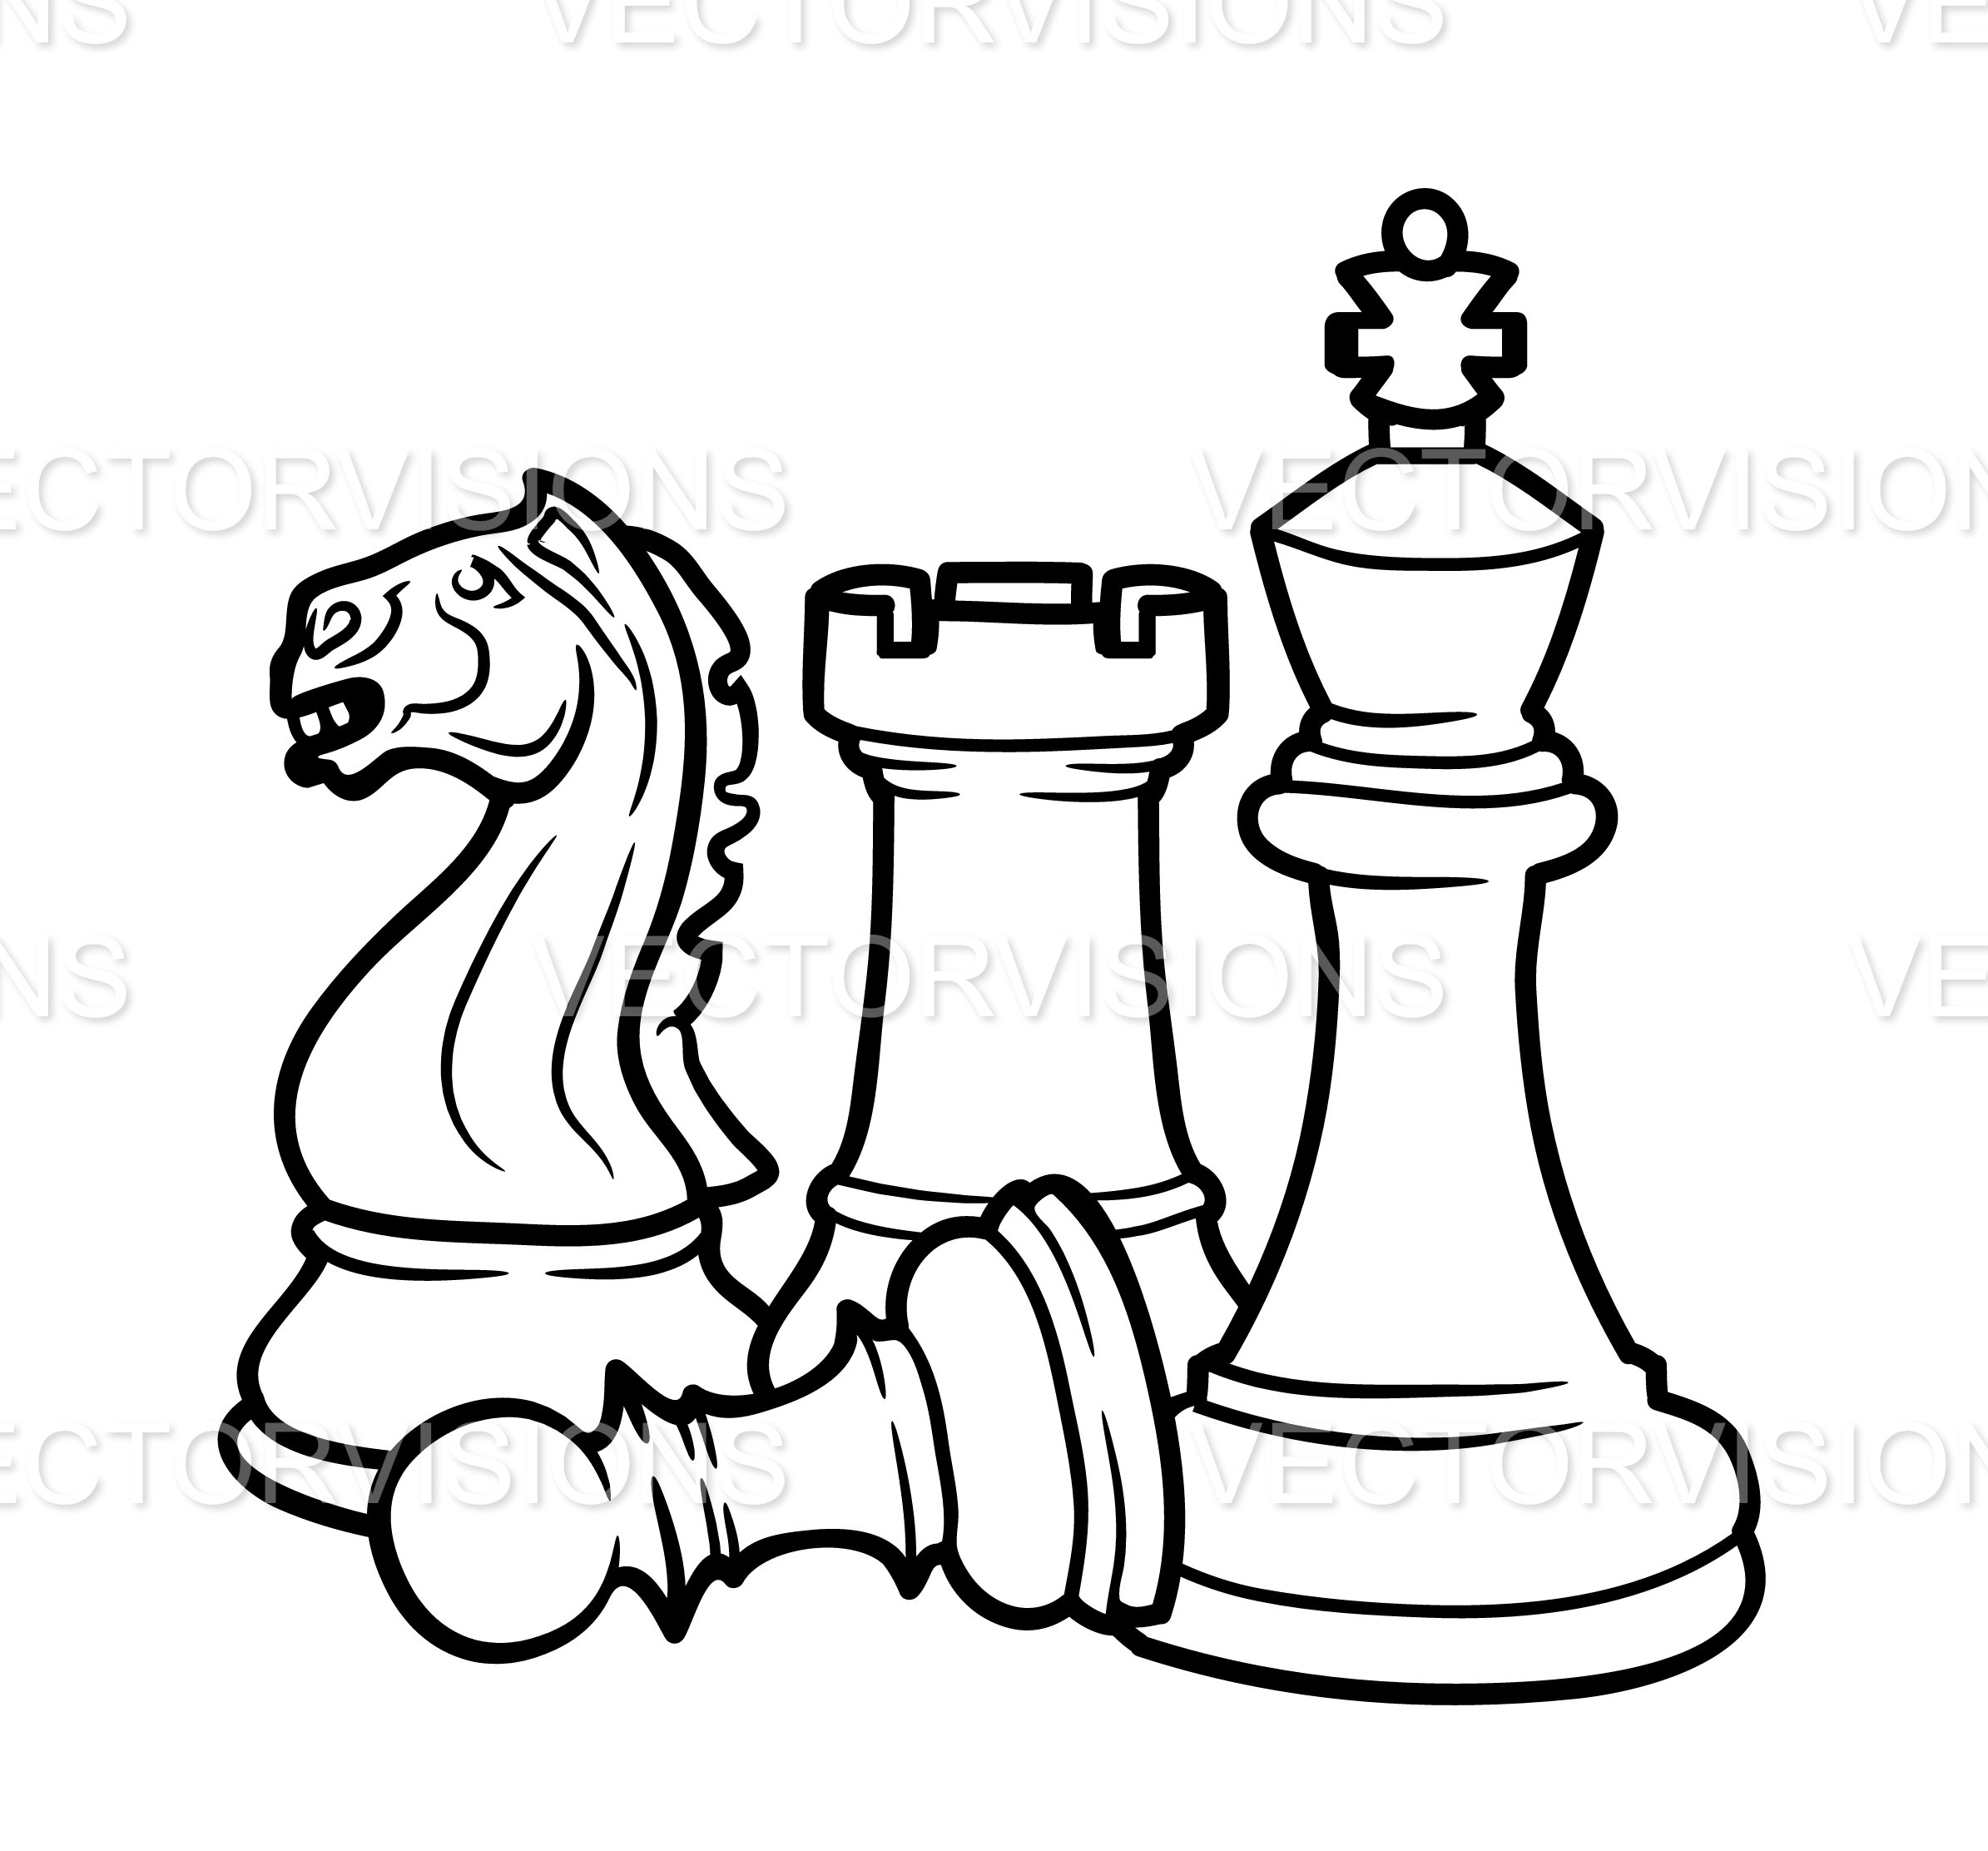 Chess Pieces and Split SVG File Cutting Template – Designed by Geeks